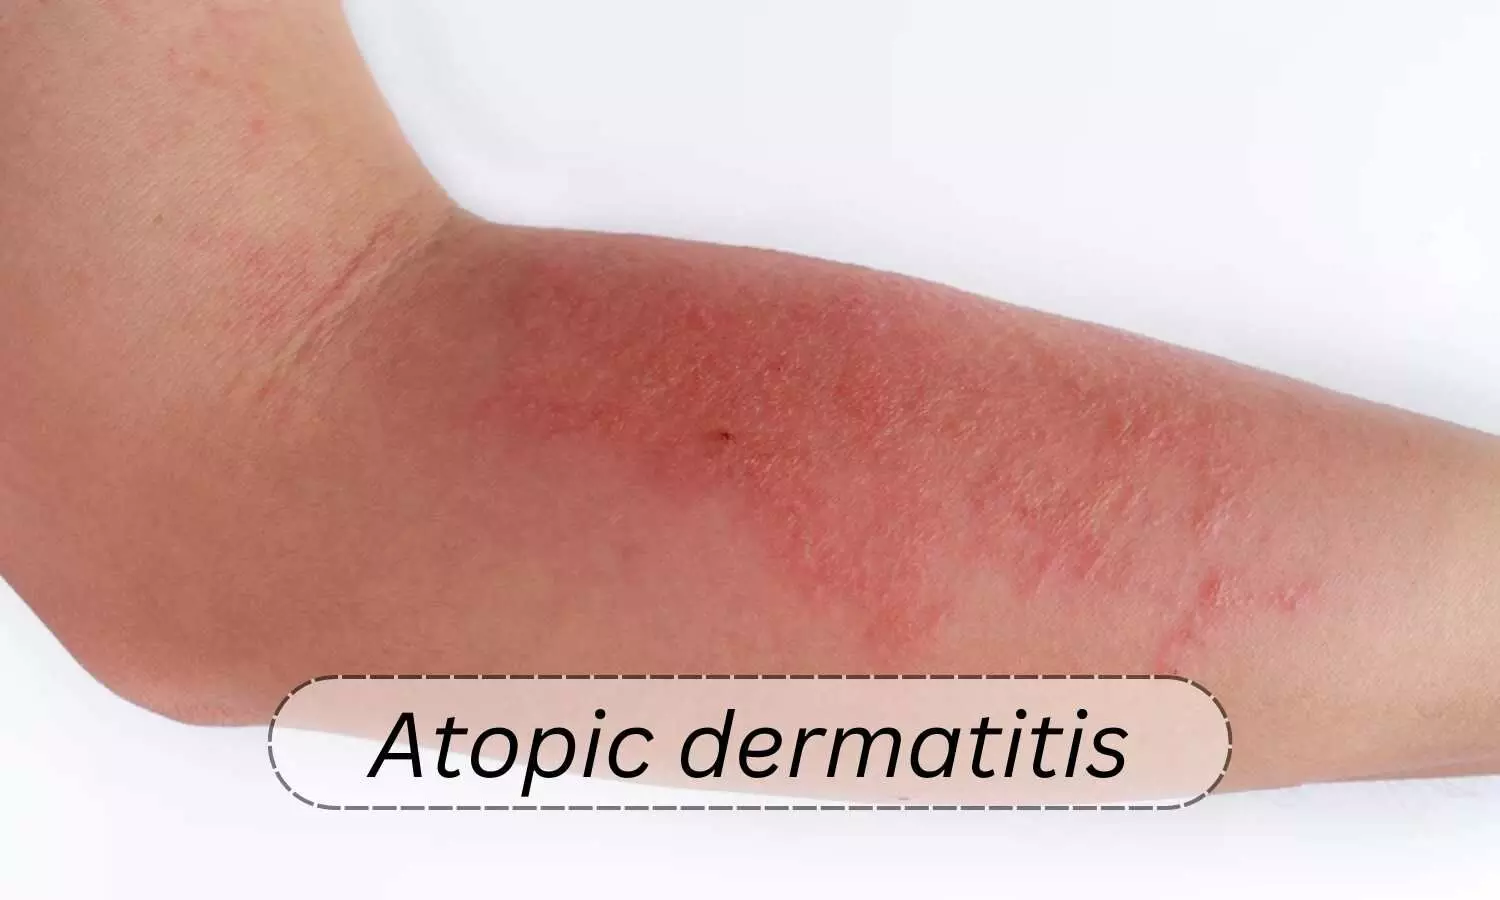 Management of atopic dermatitis  with topical therapies in adults: Updated guideline by AAD